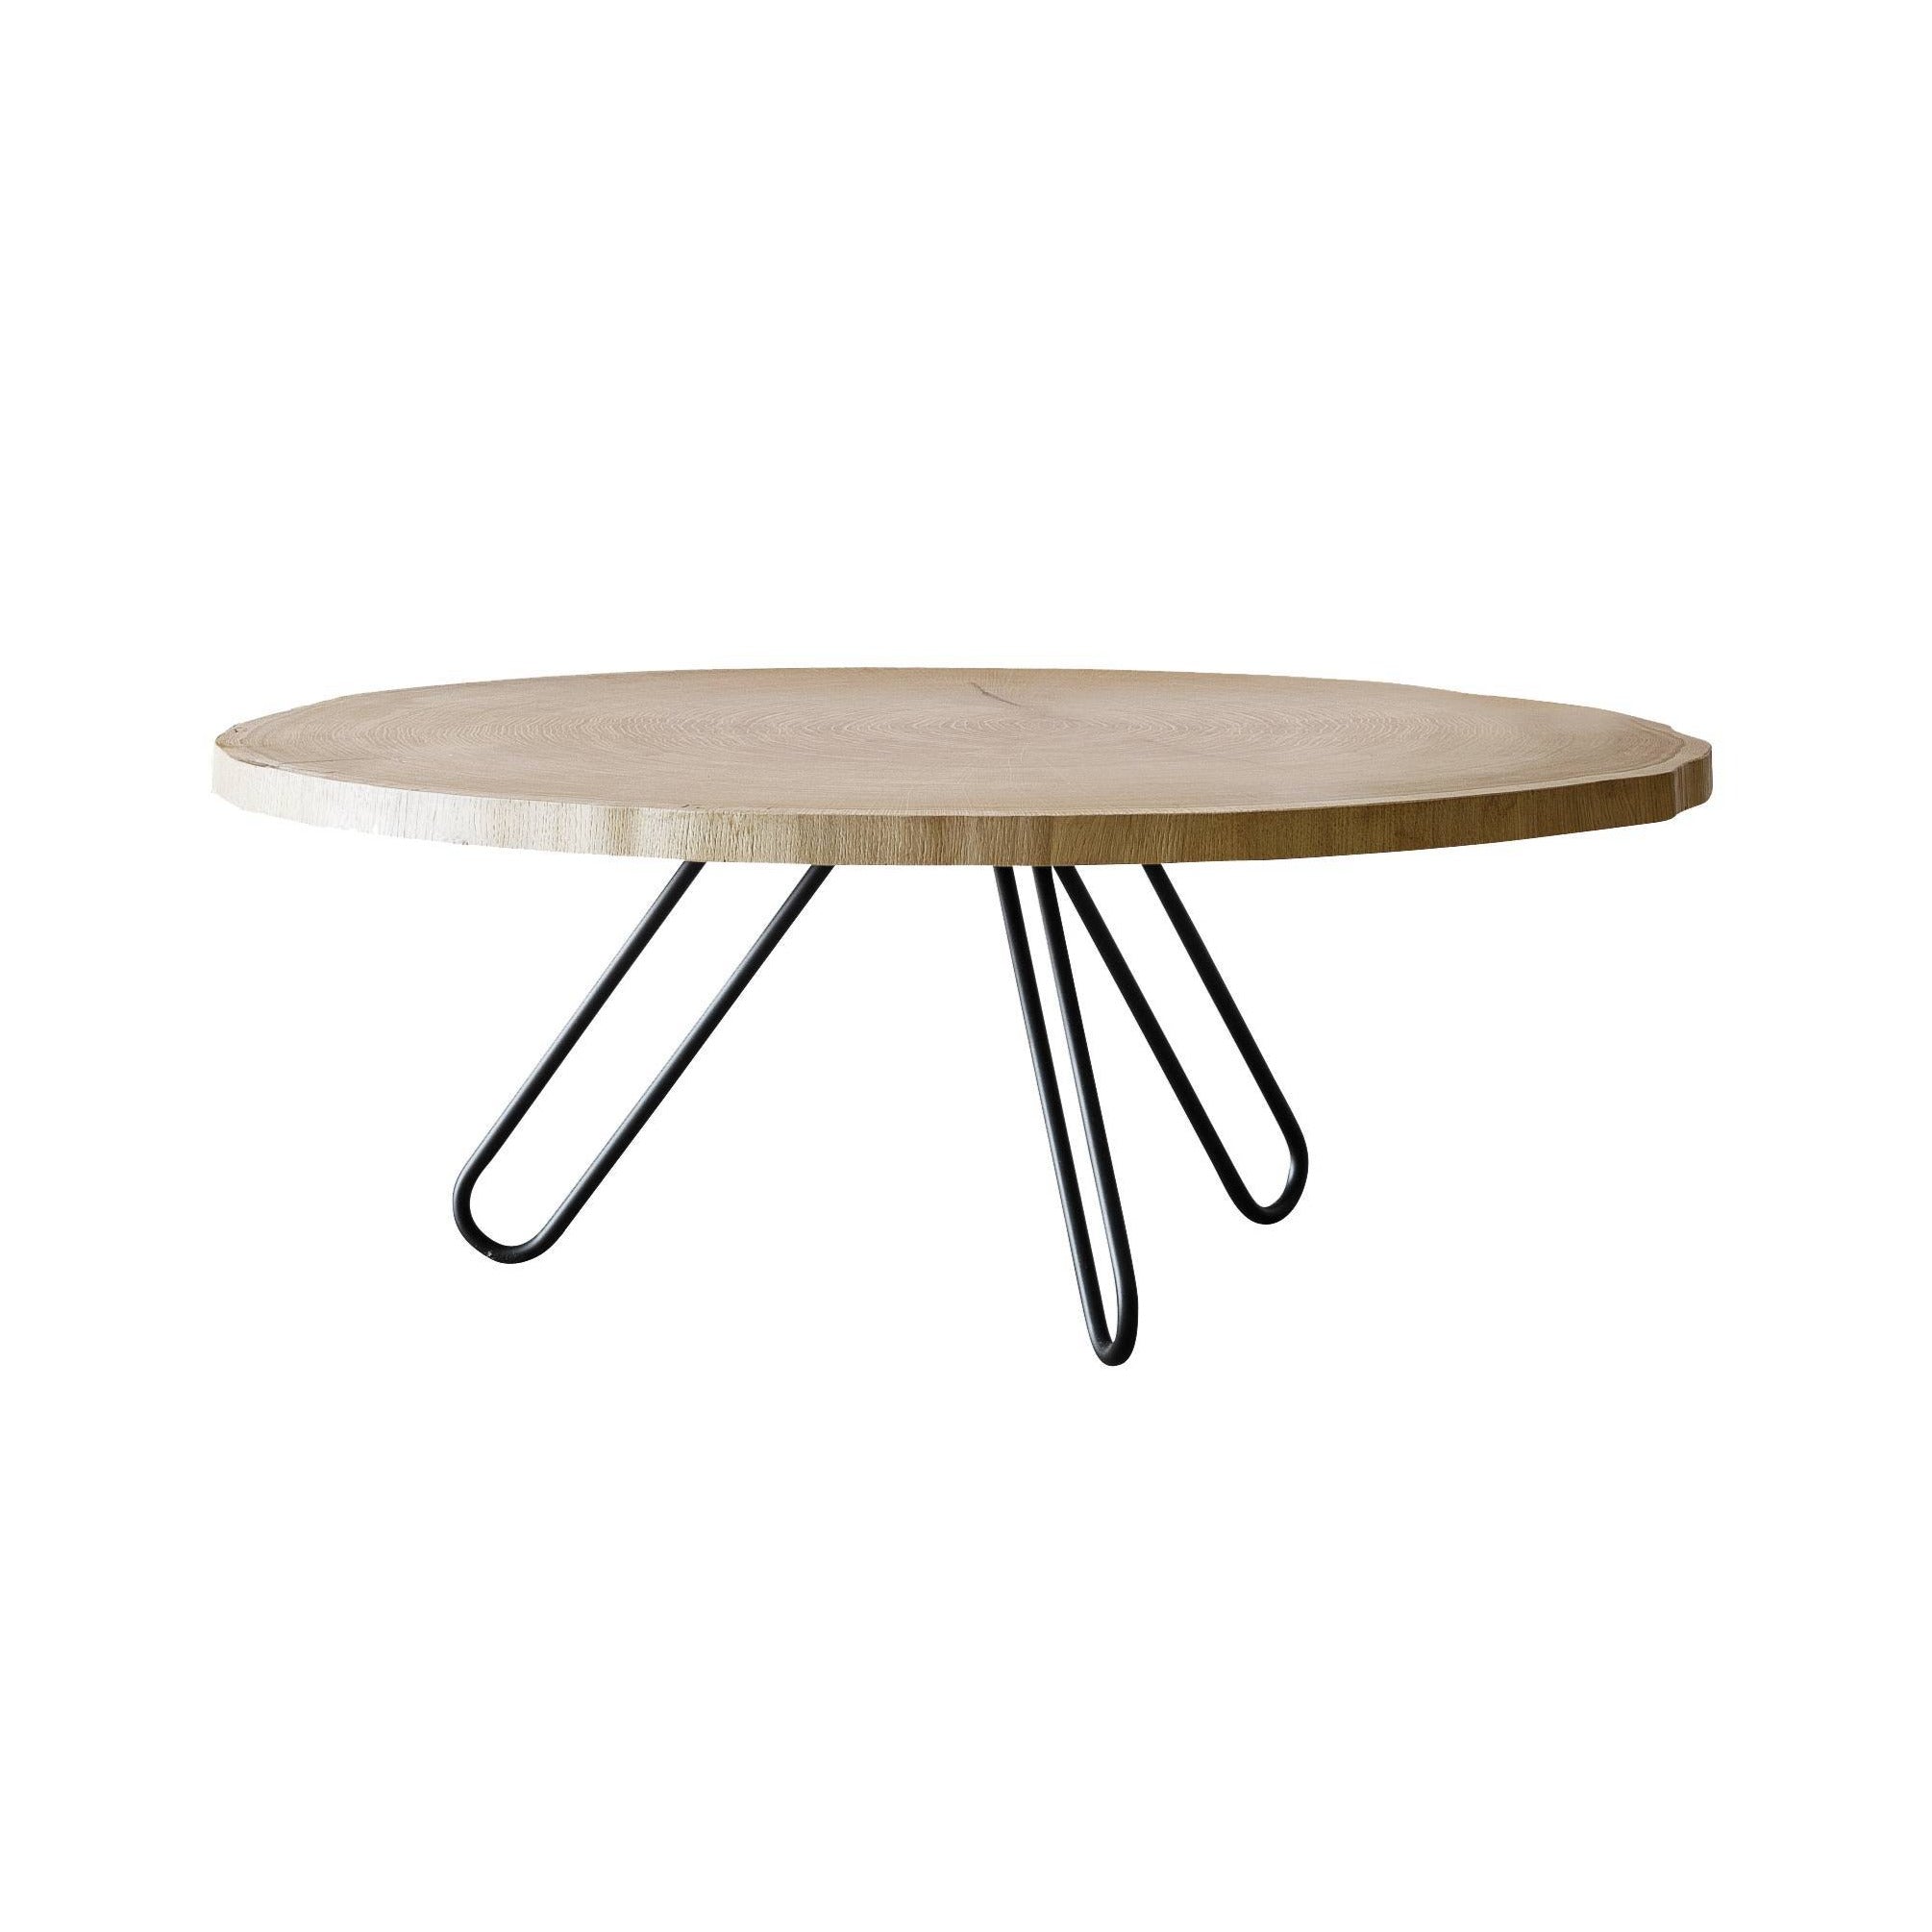 Porcino Coffee Table: Large - 31.5